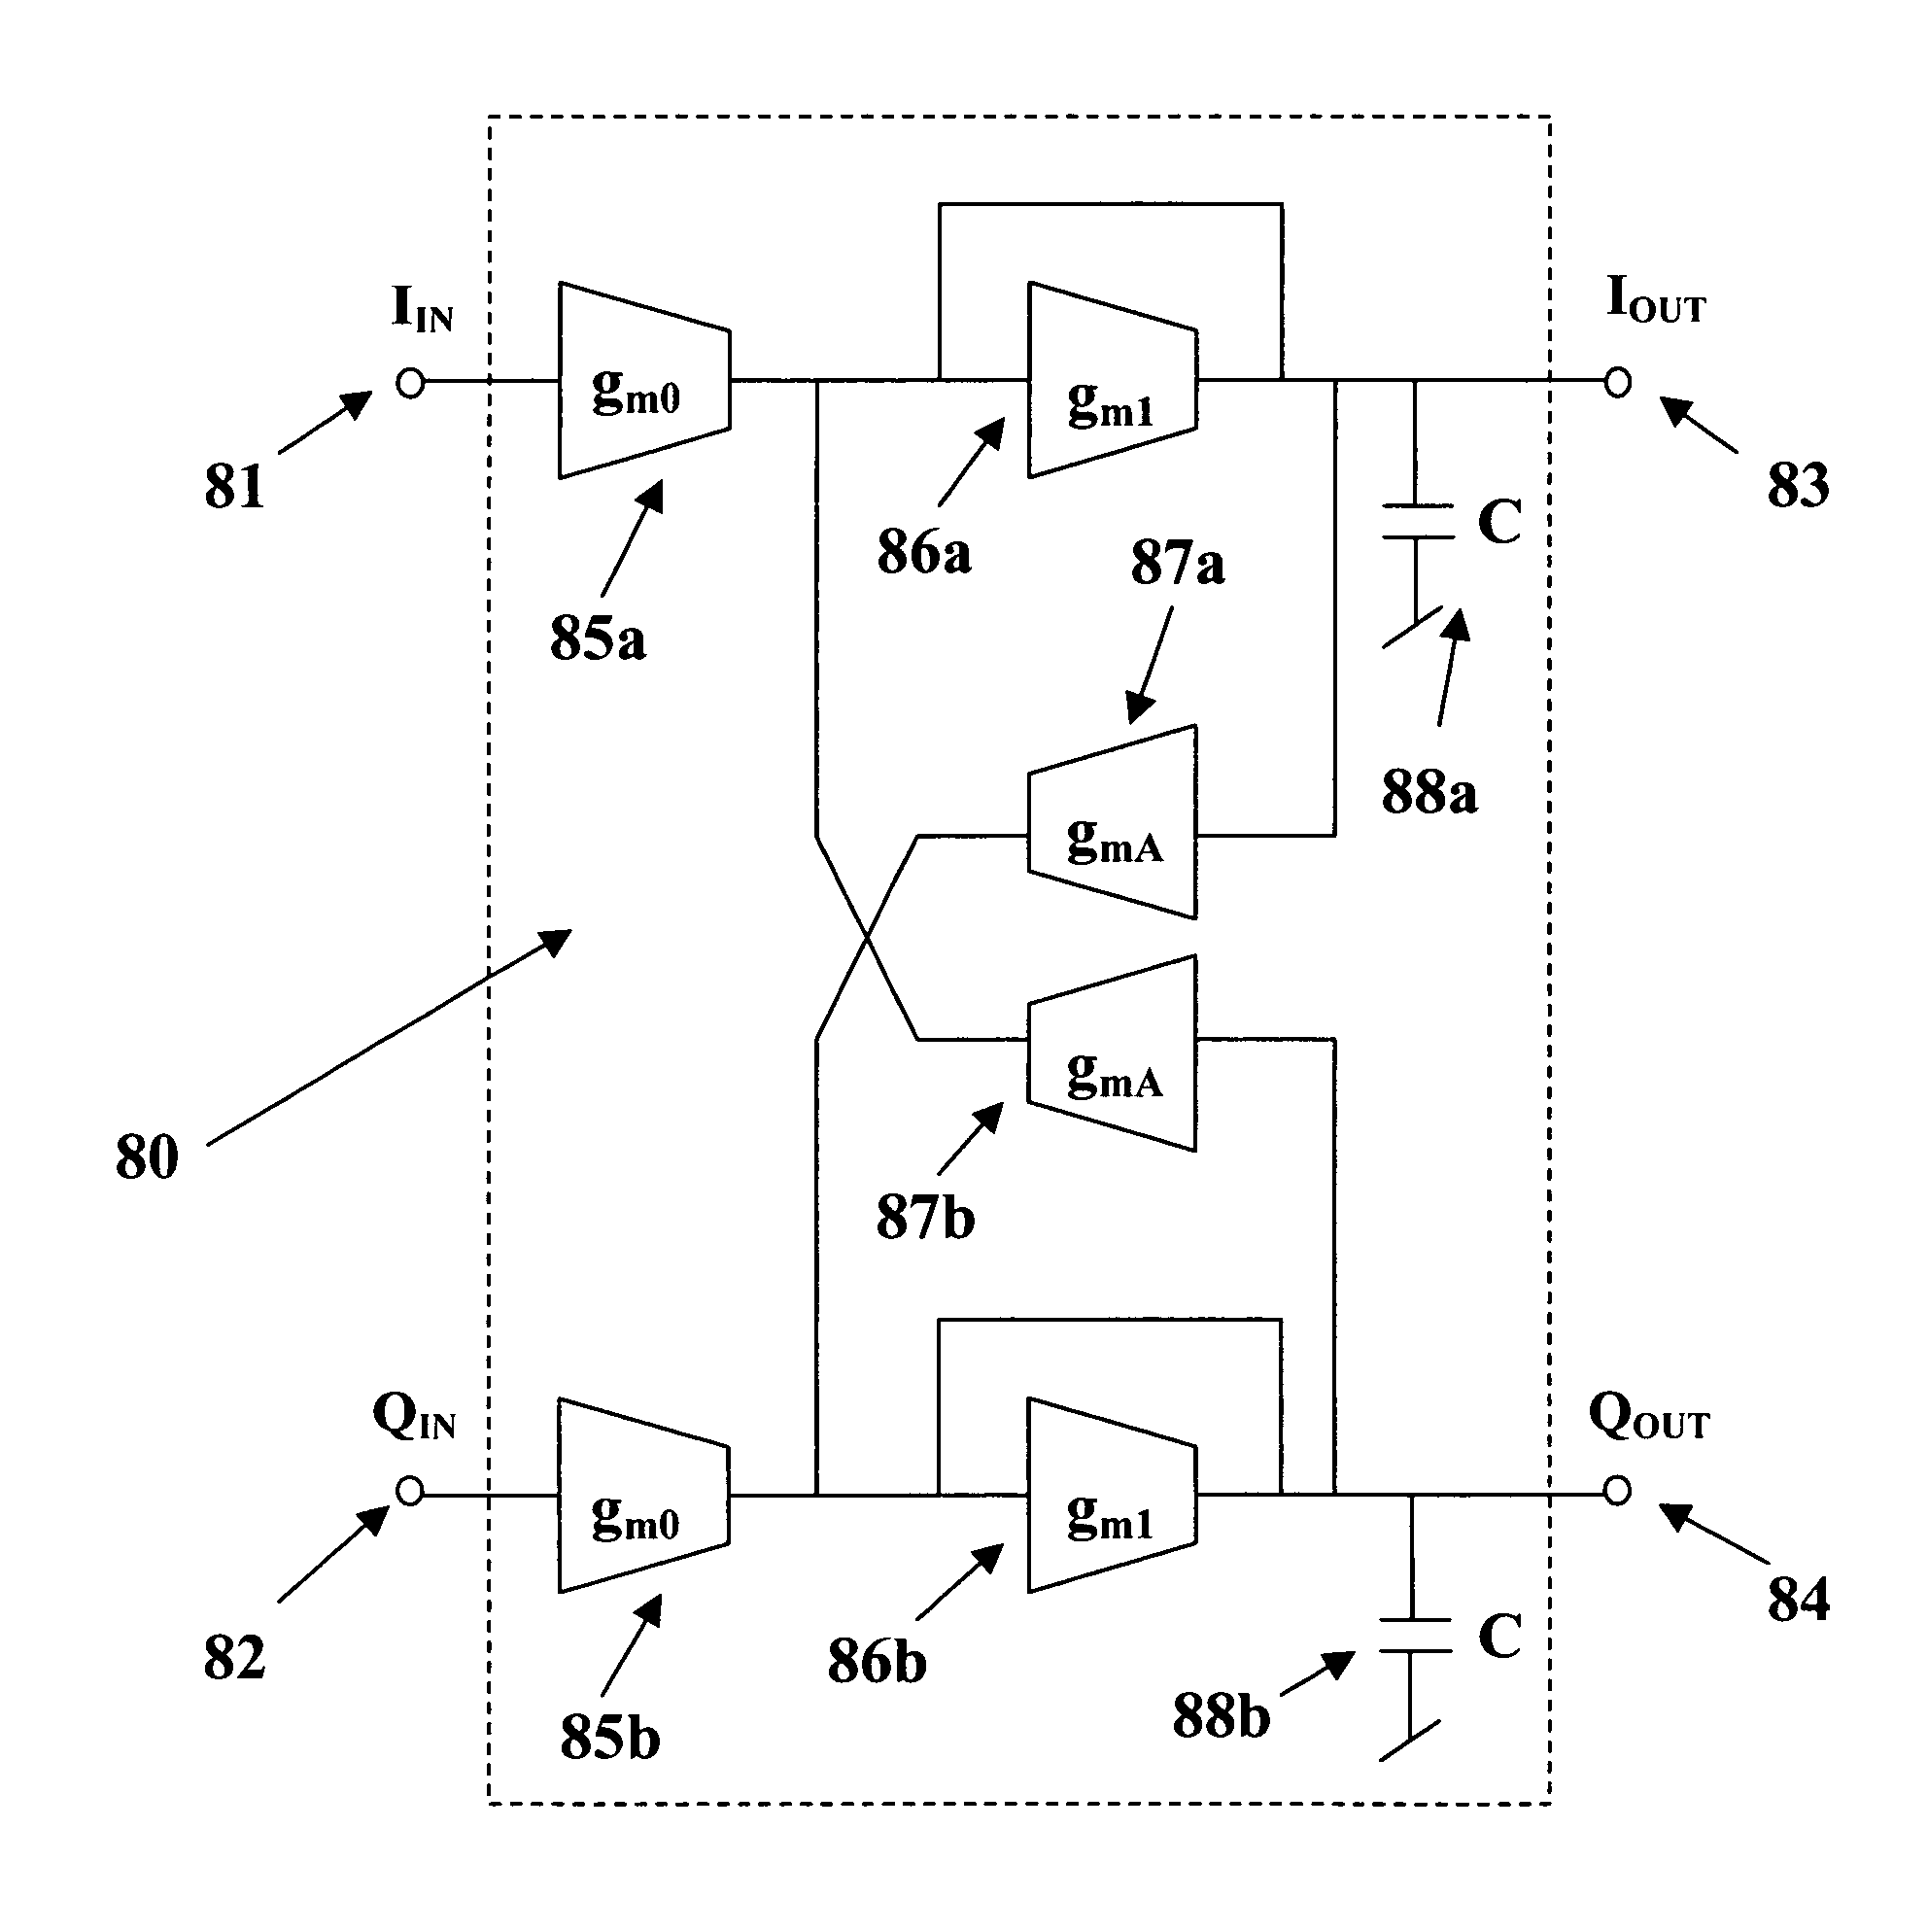 Synthesis method for an active polyphase filter